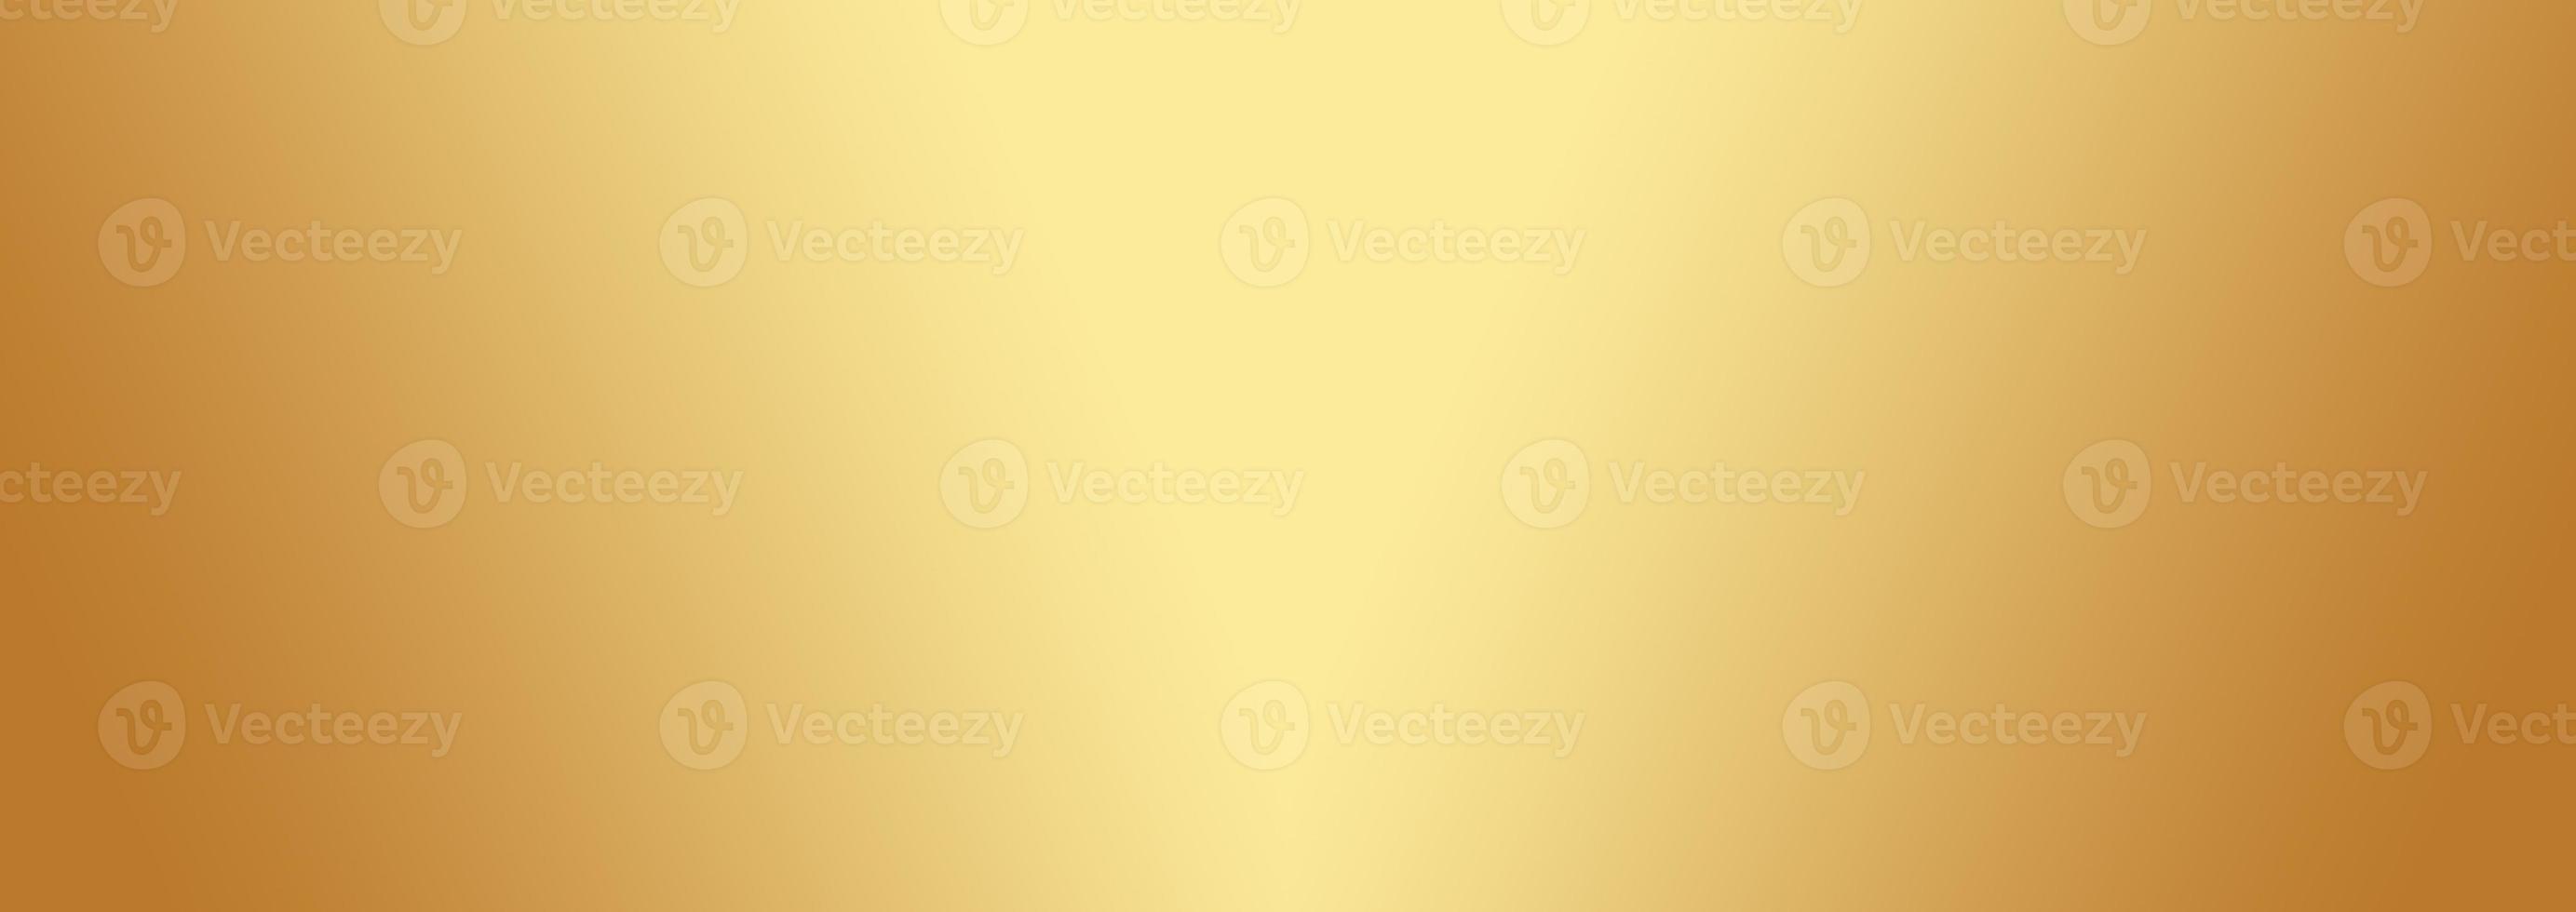 Gold wall Abstract Background yellow Diffuse color on gold gradient with soft glowing backdrop texture Design cool tone for web, mobile applications, covers, card, infographic, write Christmas photo